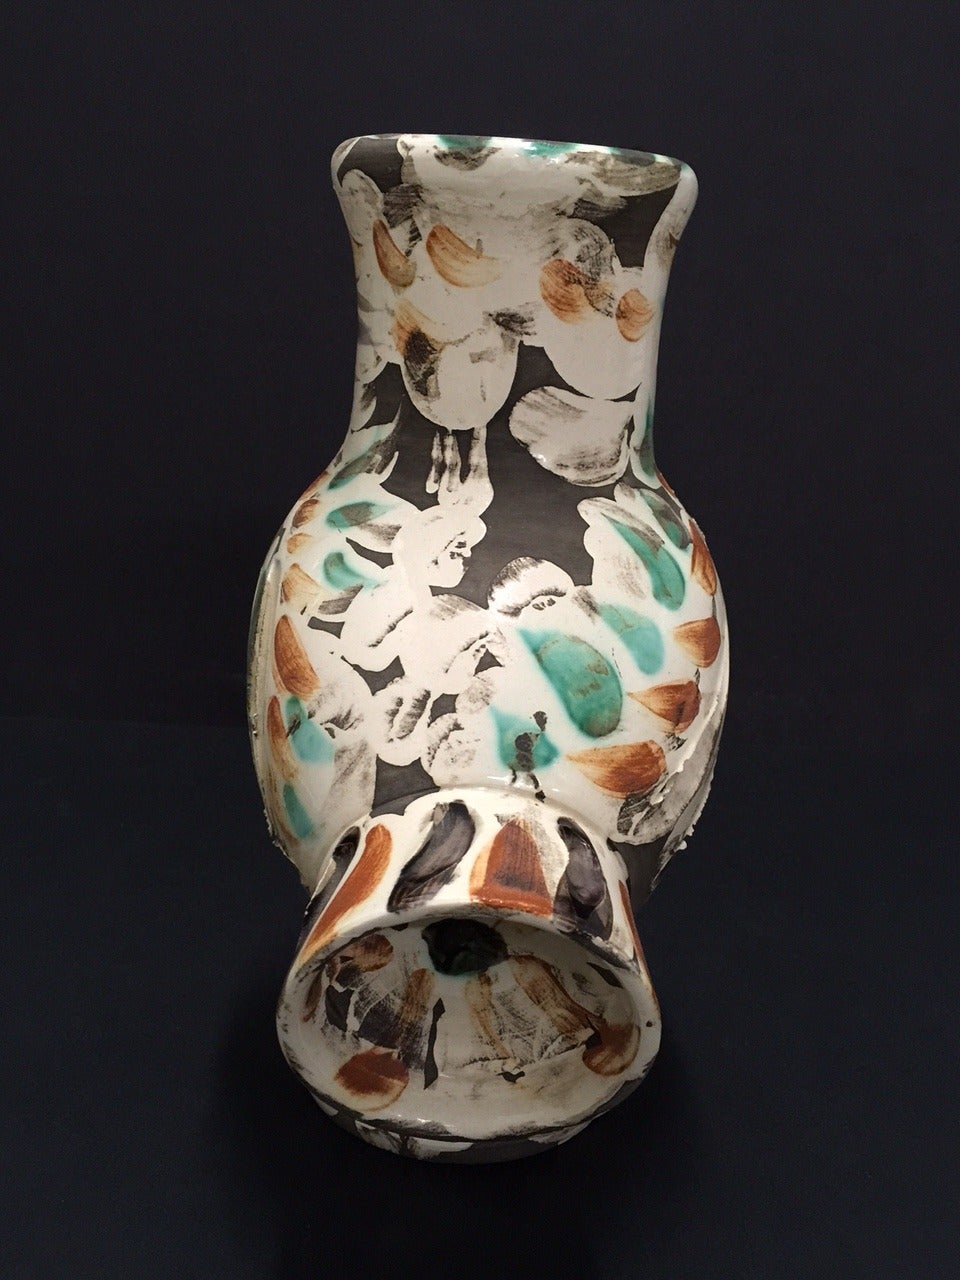 Pablo Picasso Original Ceramic Vase, made of white earthenware clay, hand- painted with black, red, white, green and grey.From the edition of 350. Inscribed Madoura/Edition Picasso on verso. 

(AR 602)